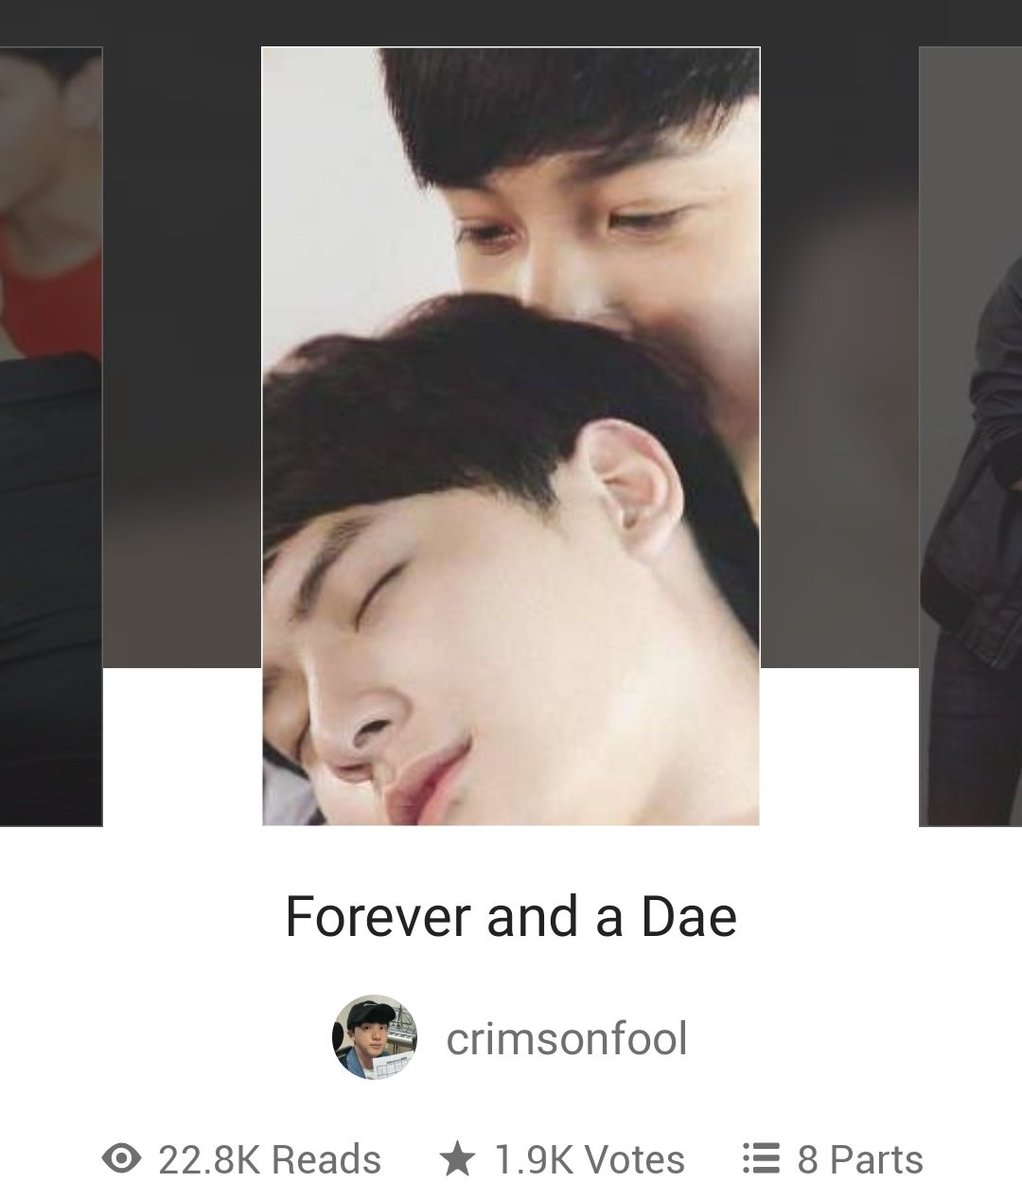  Forever and a Dae by crimsonfoolI'm a sucker of her fics hahaha this is a really cute short fic of hers featuring Dae!link:  https://my.w.tt/MOyWrWFcS6 